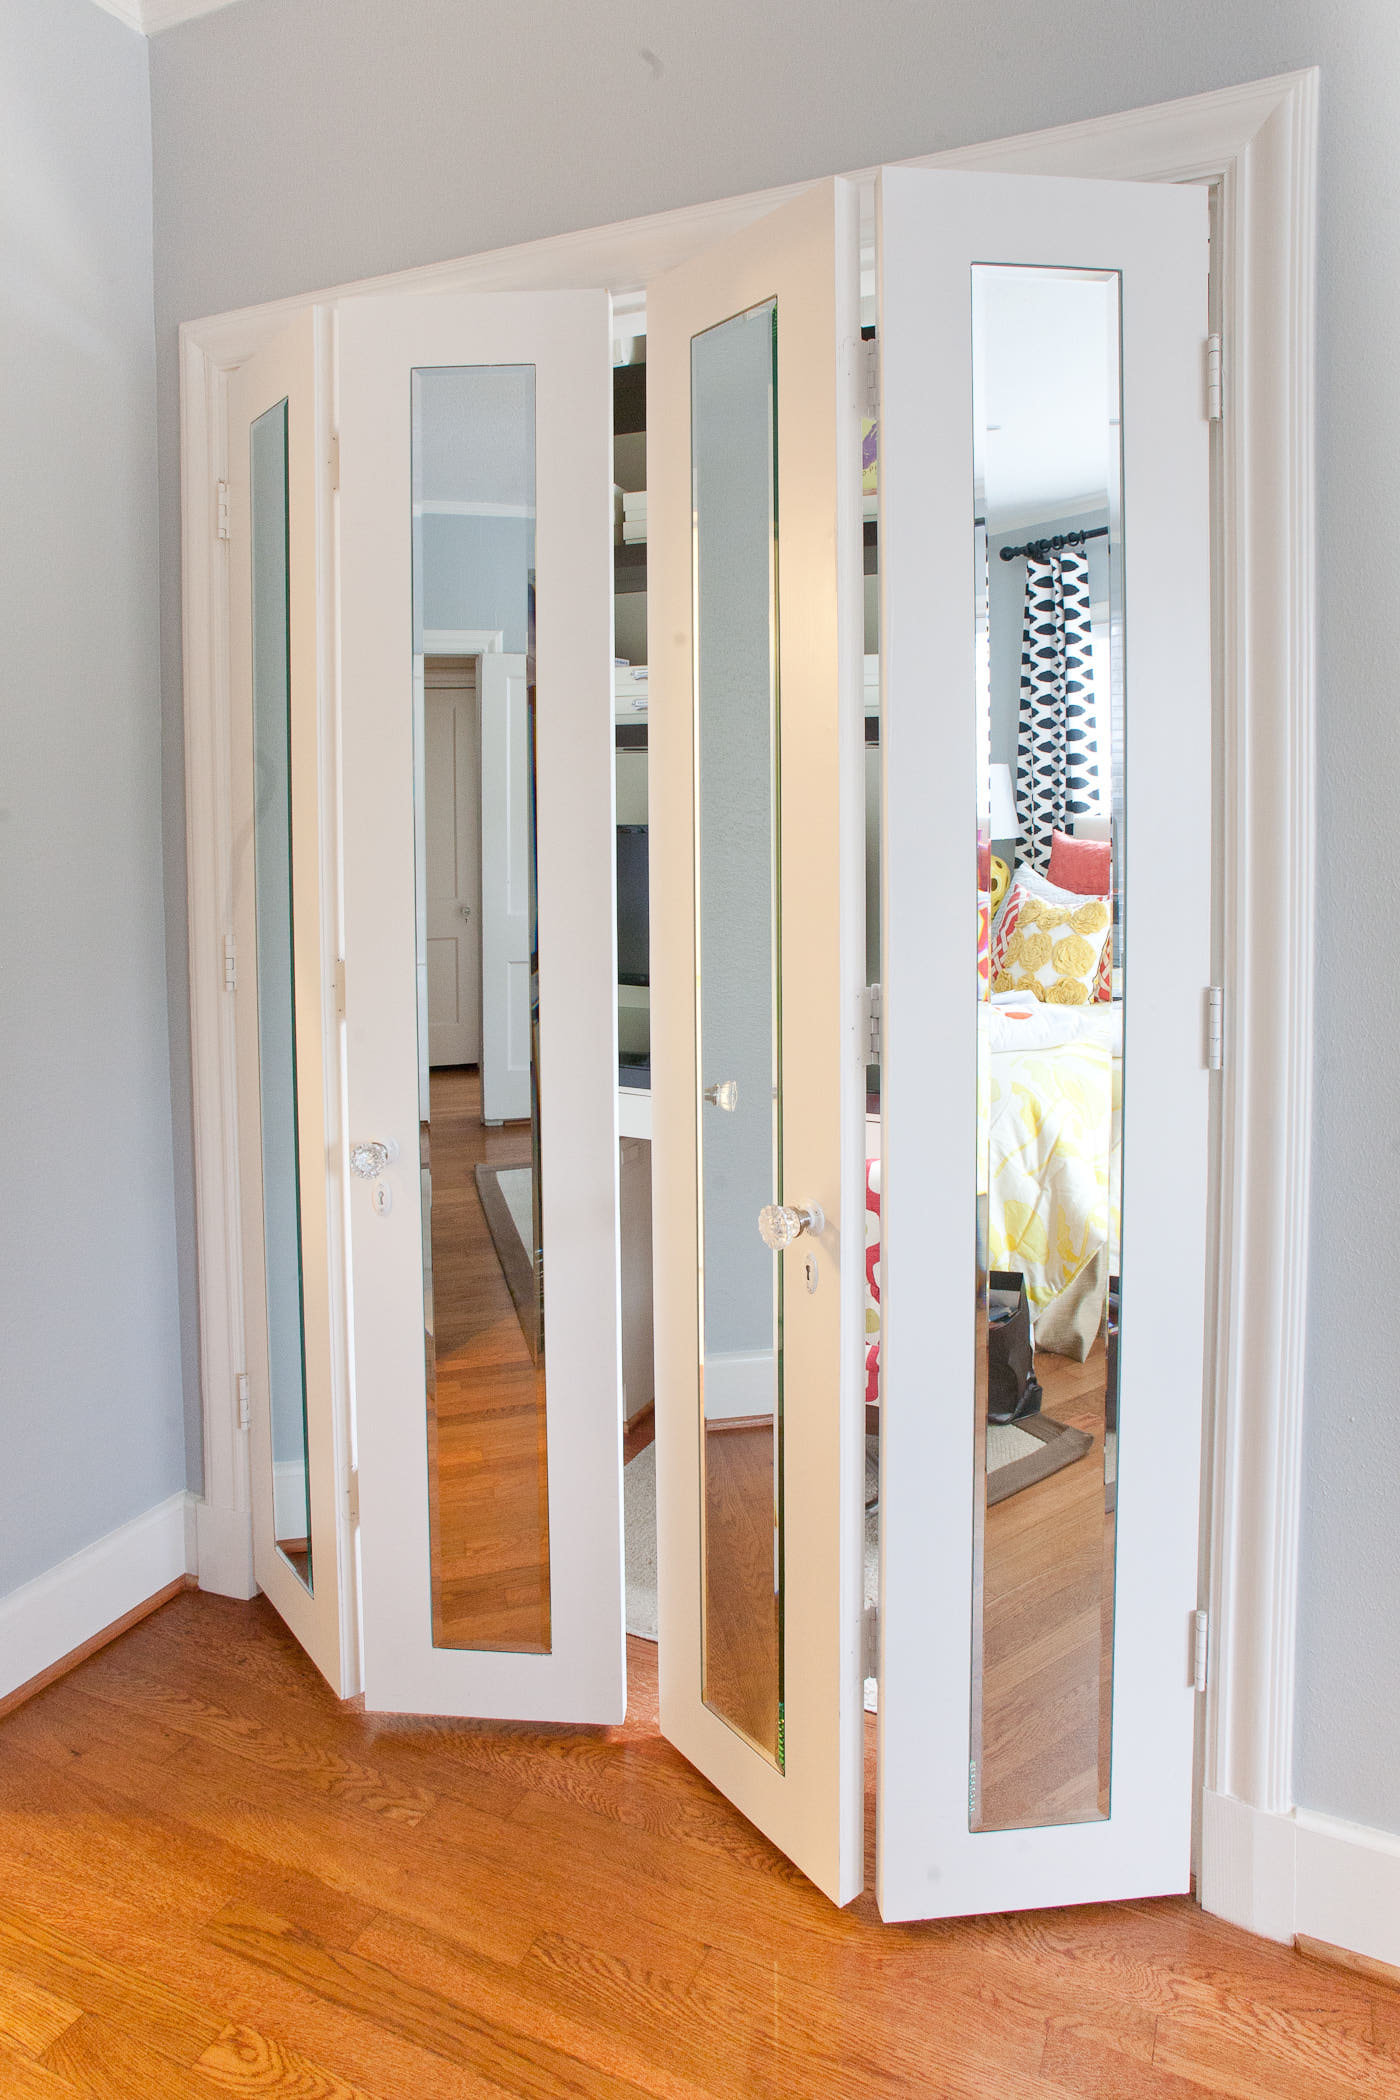 Mirror Design Wooden Awesome Mirror Design Modern Minimalist Wooden Floor Closet Ideas For Small Bedrooms In White Window Design On Wooden Flooring Decoration Elegant Closet Ideas For Small Bedrooms